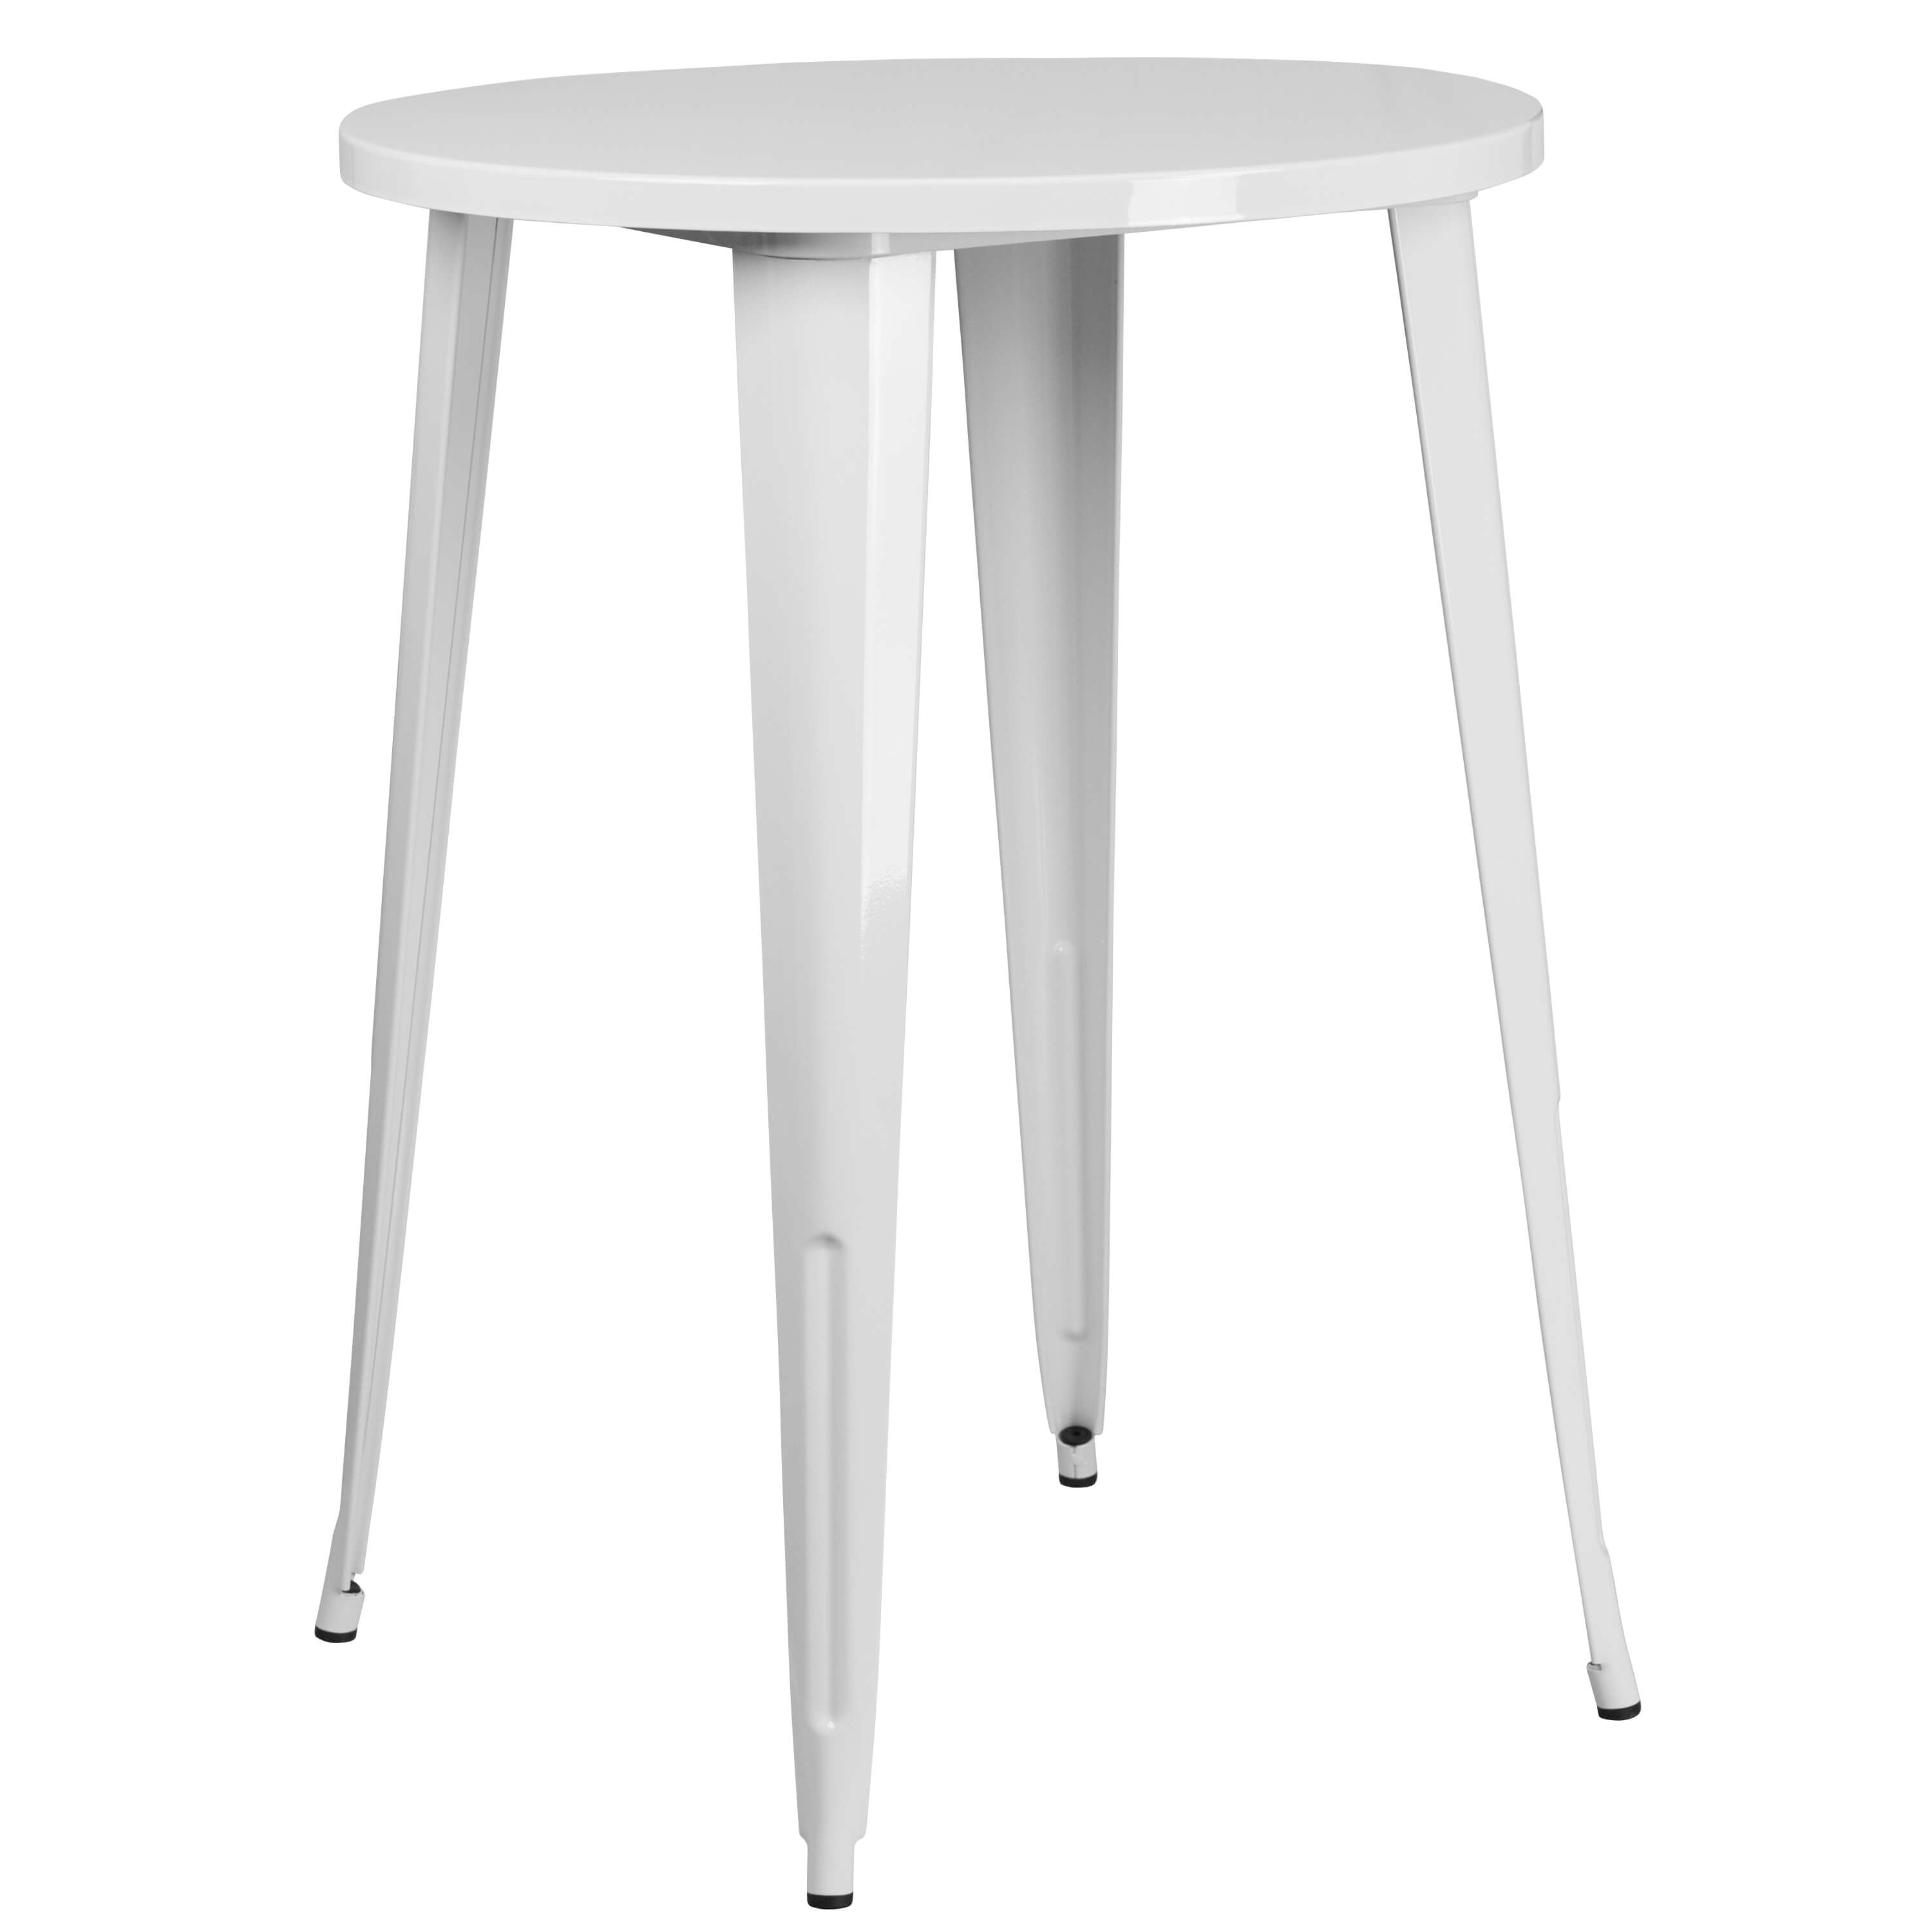 Cafe table CUB CH 51090 40 WH GG FLA